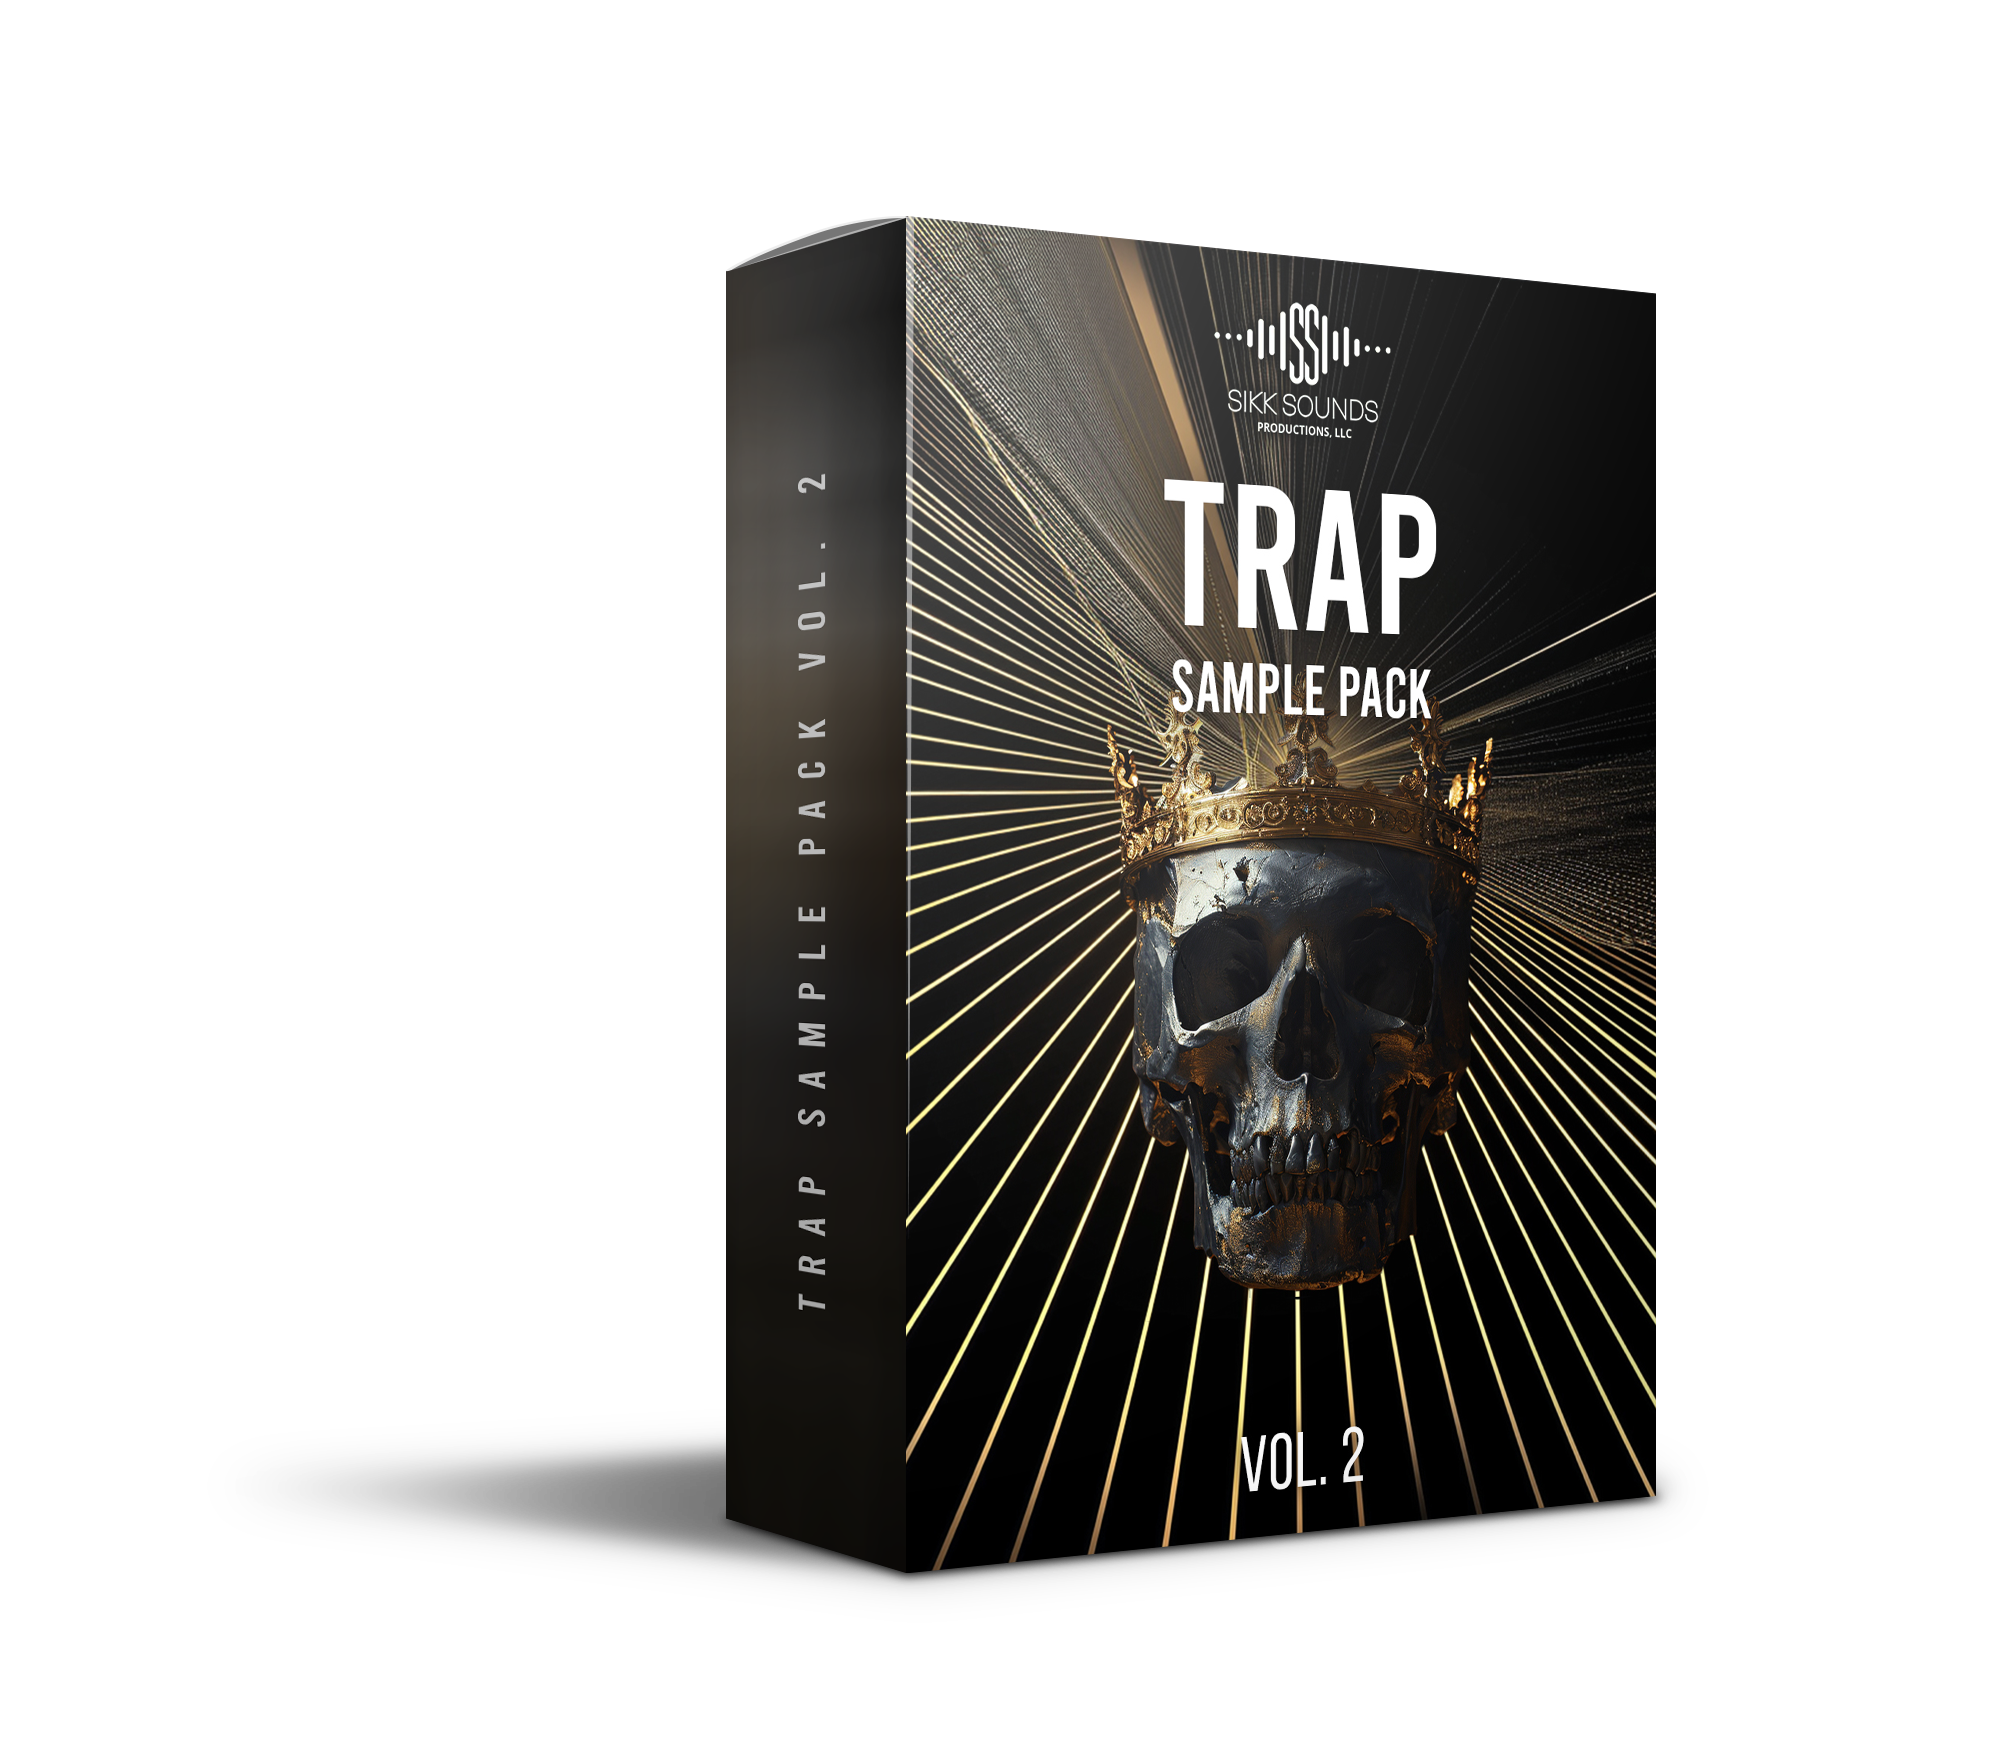 SiKKSounds Trap Sample Pack Vol.2